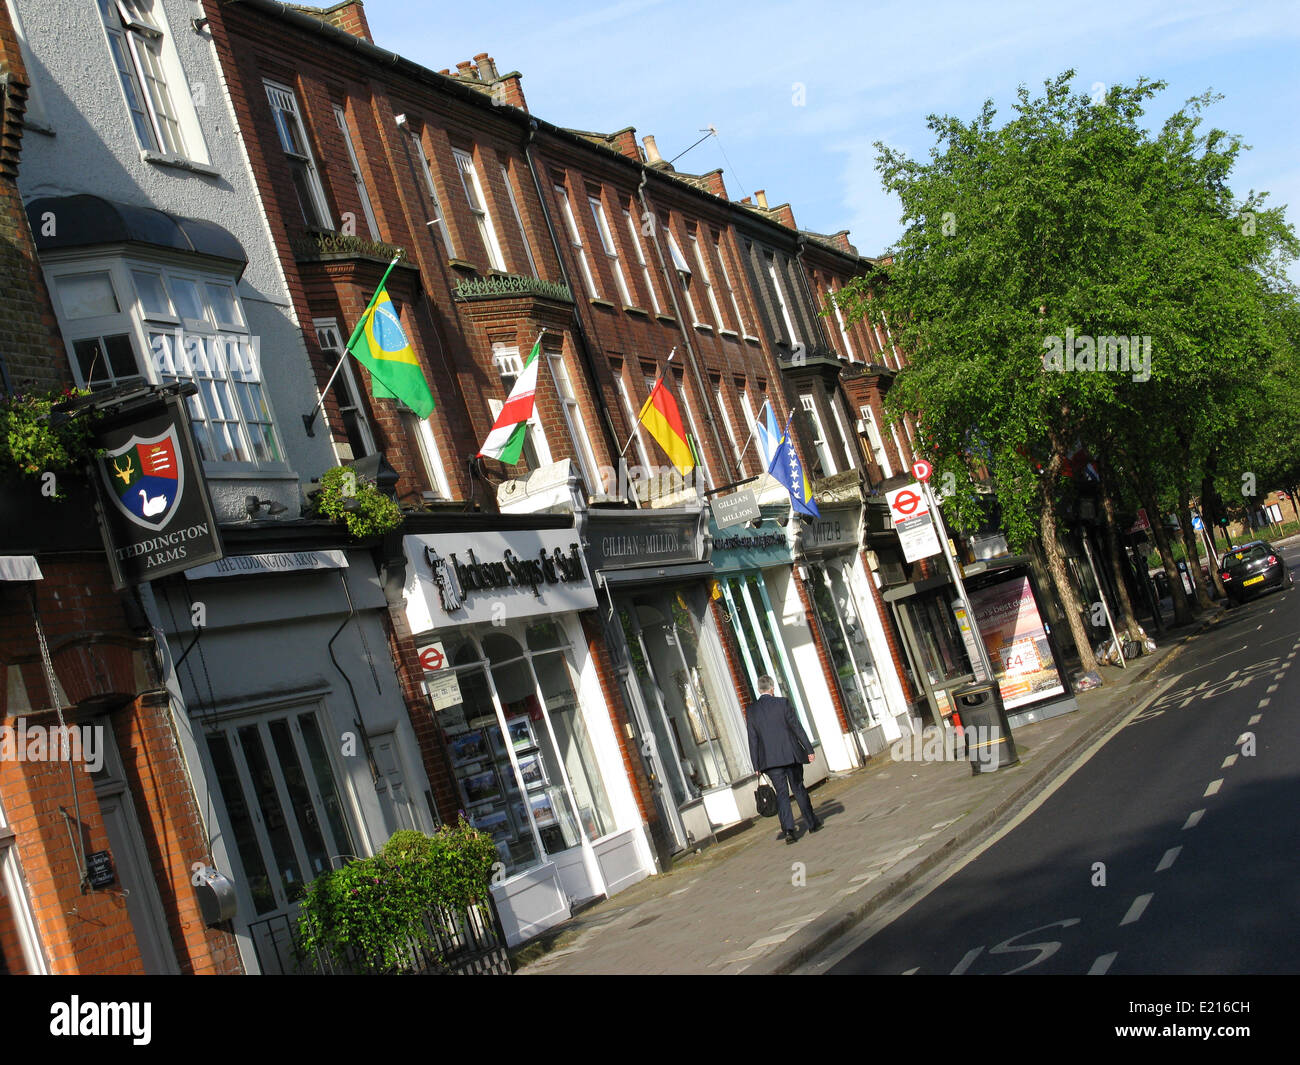 National flags of the competing countries line Teddington High Street to mark the beginning of the 2014 FIFA Football World Cup in Brazil. Credit:  Ian Bottle/Alamy Live News Stock Photo